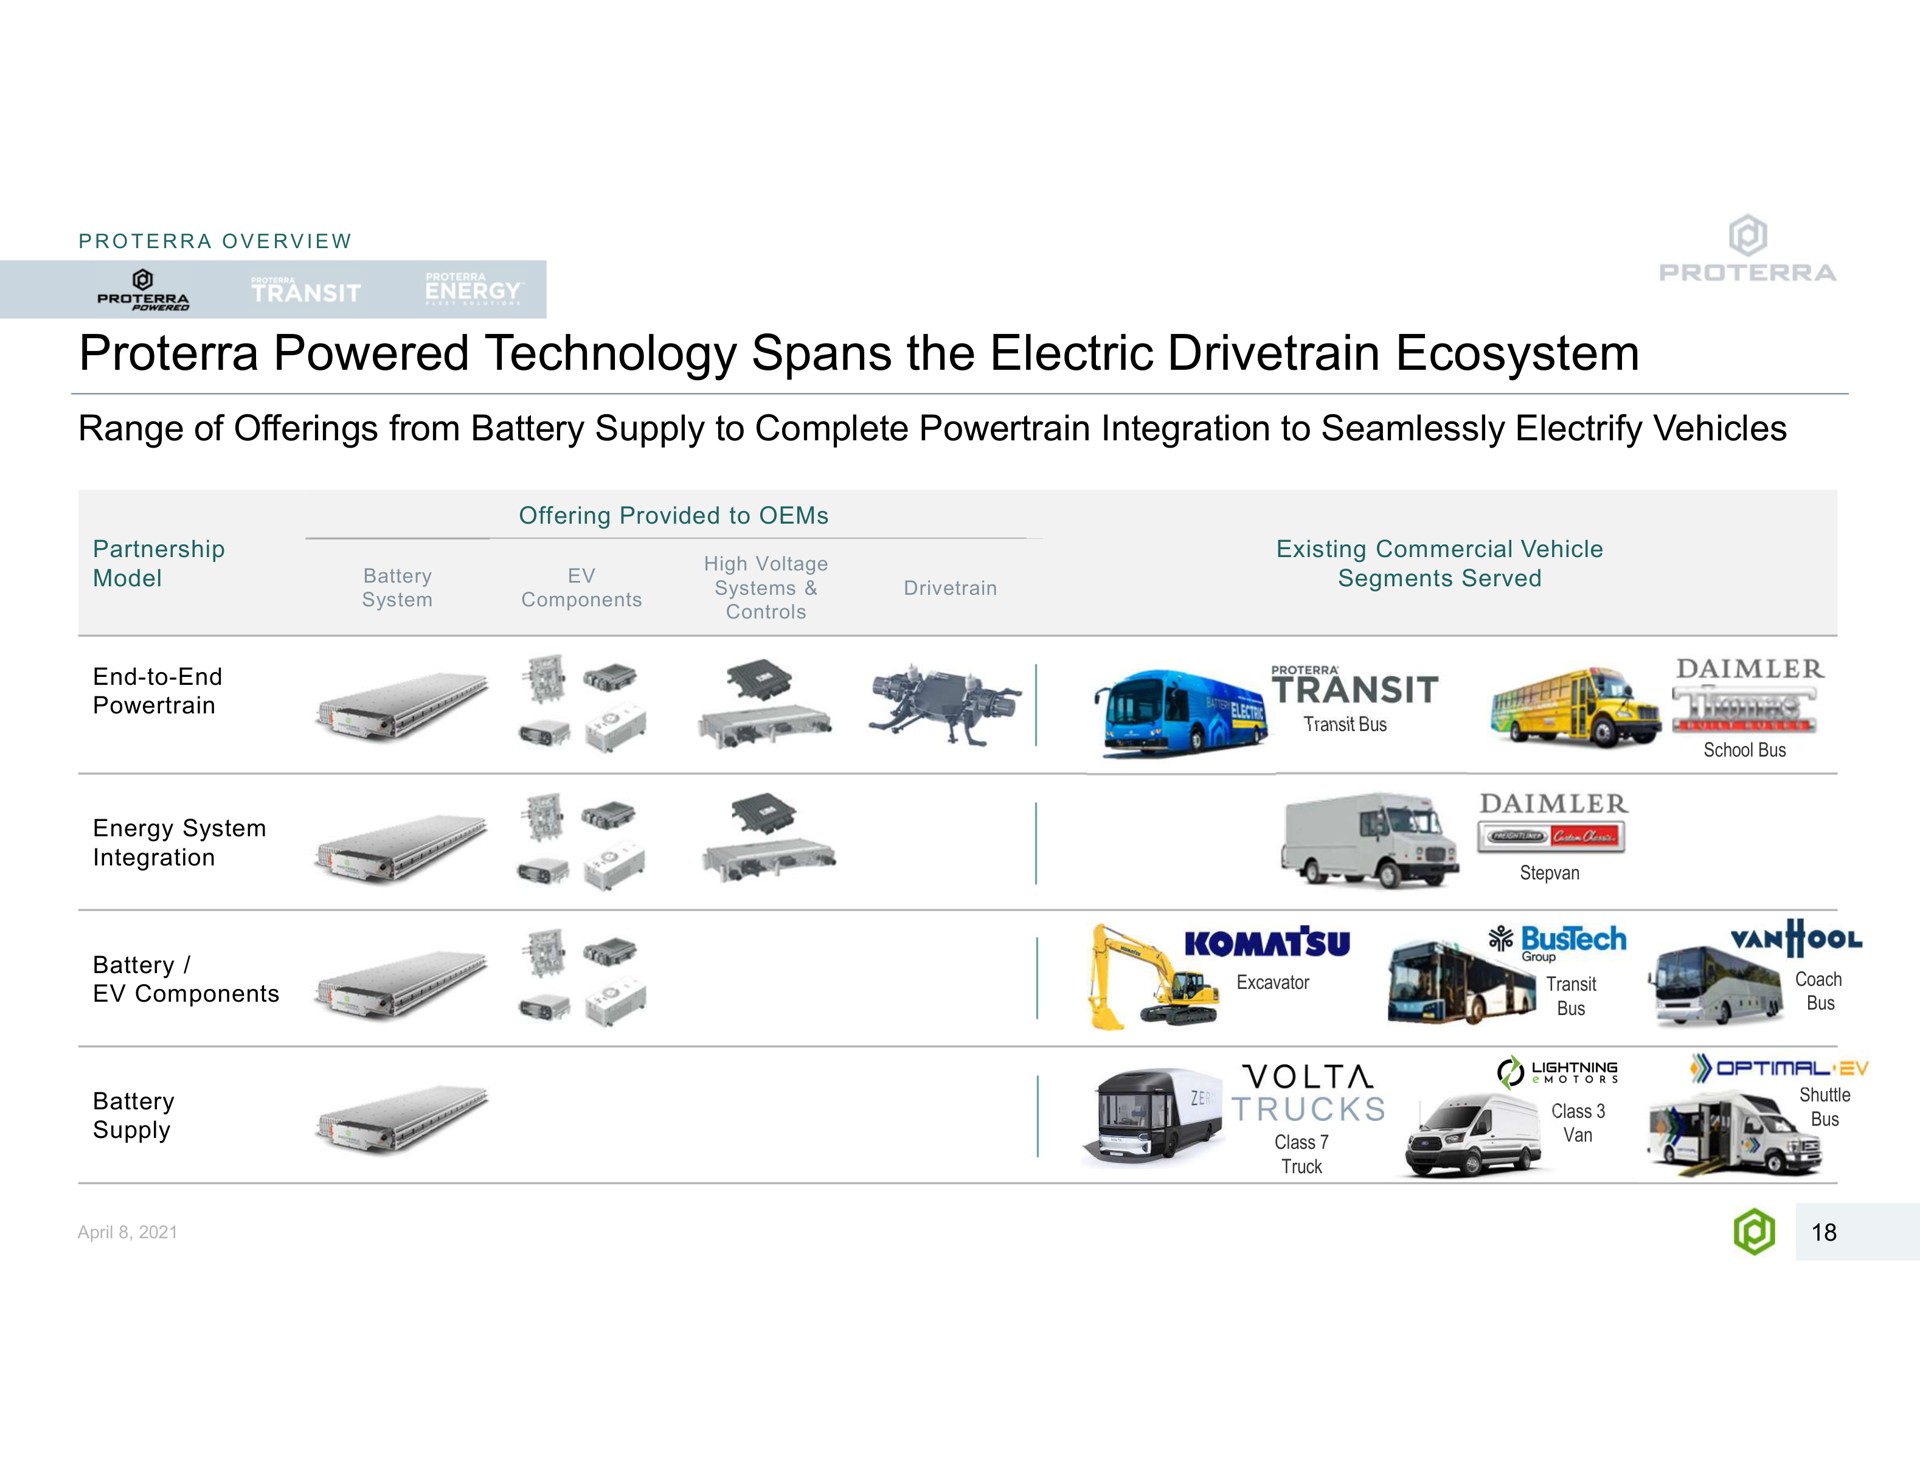 powered technology spans the electric ecosystem overview range of offerings from battery supply to complete integration to seamlessly electrify vehicles partnership model end to end offering provided to high voltage components systems controls a if energy system integration gas if existing commercial vehicle segments served serine ret a aide bus battery components sea a we nat attery ake a lightning a optimal as truck | Proterra